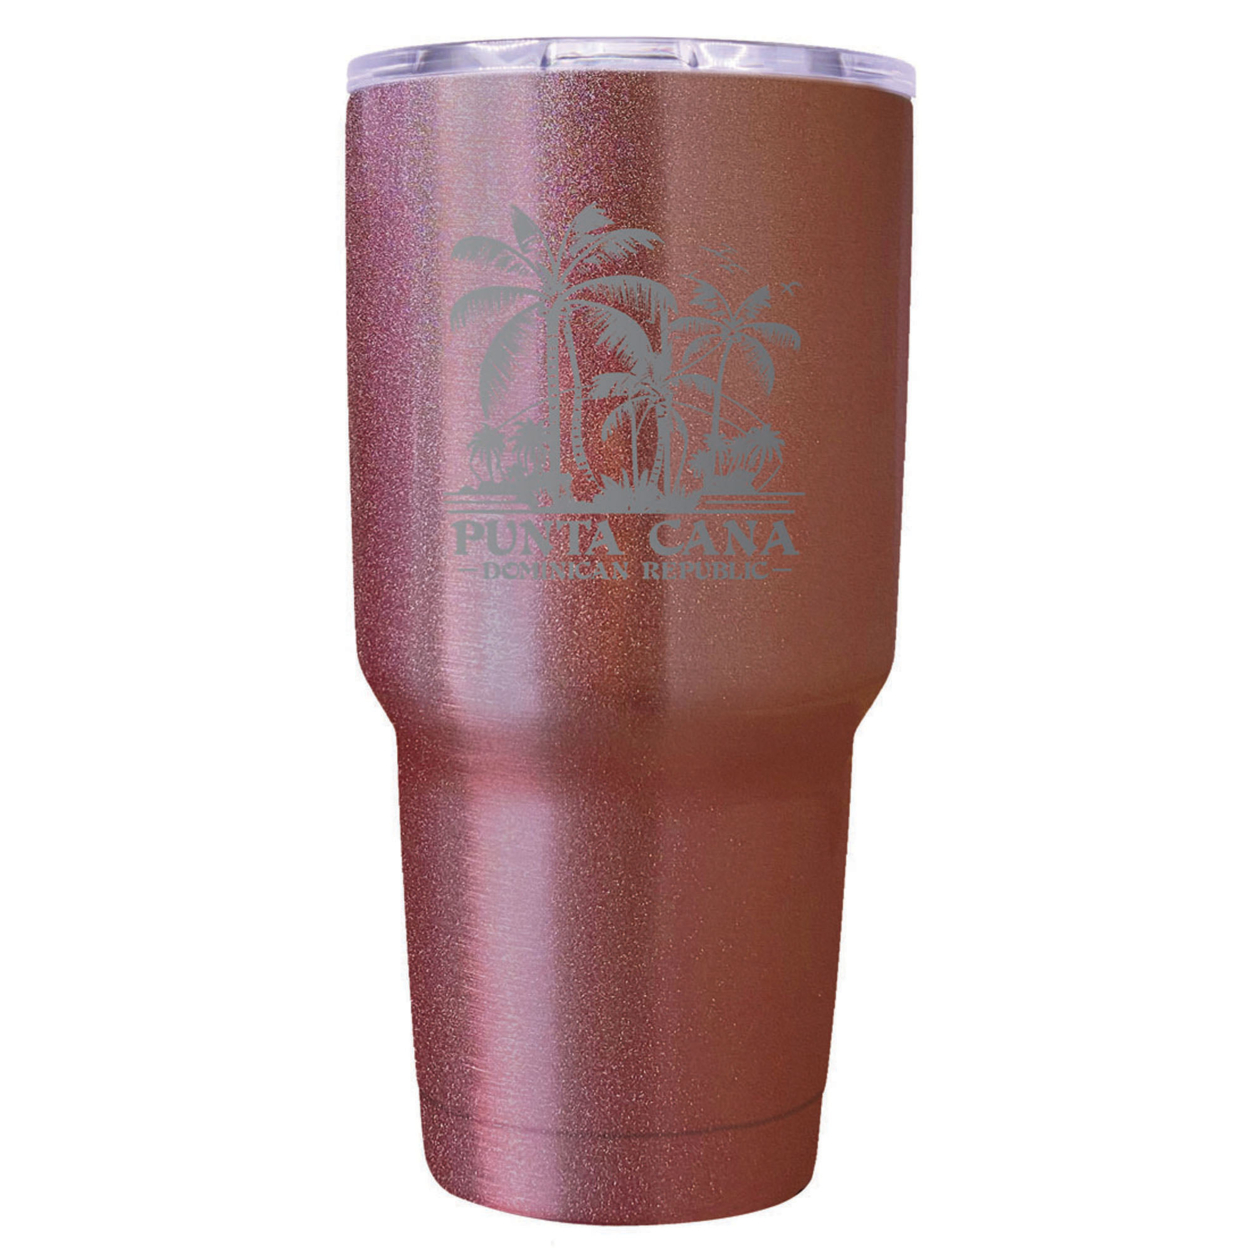 Punta Cana Dominican Republic Souvenir 24 Oz Insulated Stainless Steel Tumbler Etched - Rose Gold, PALMS